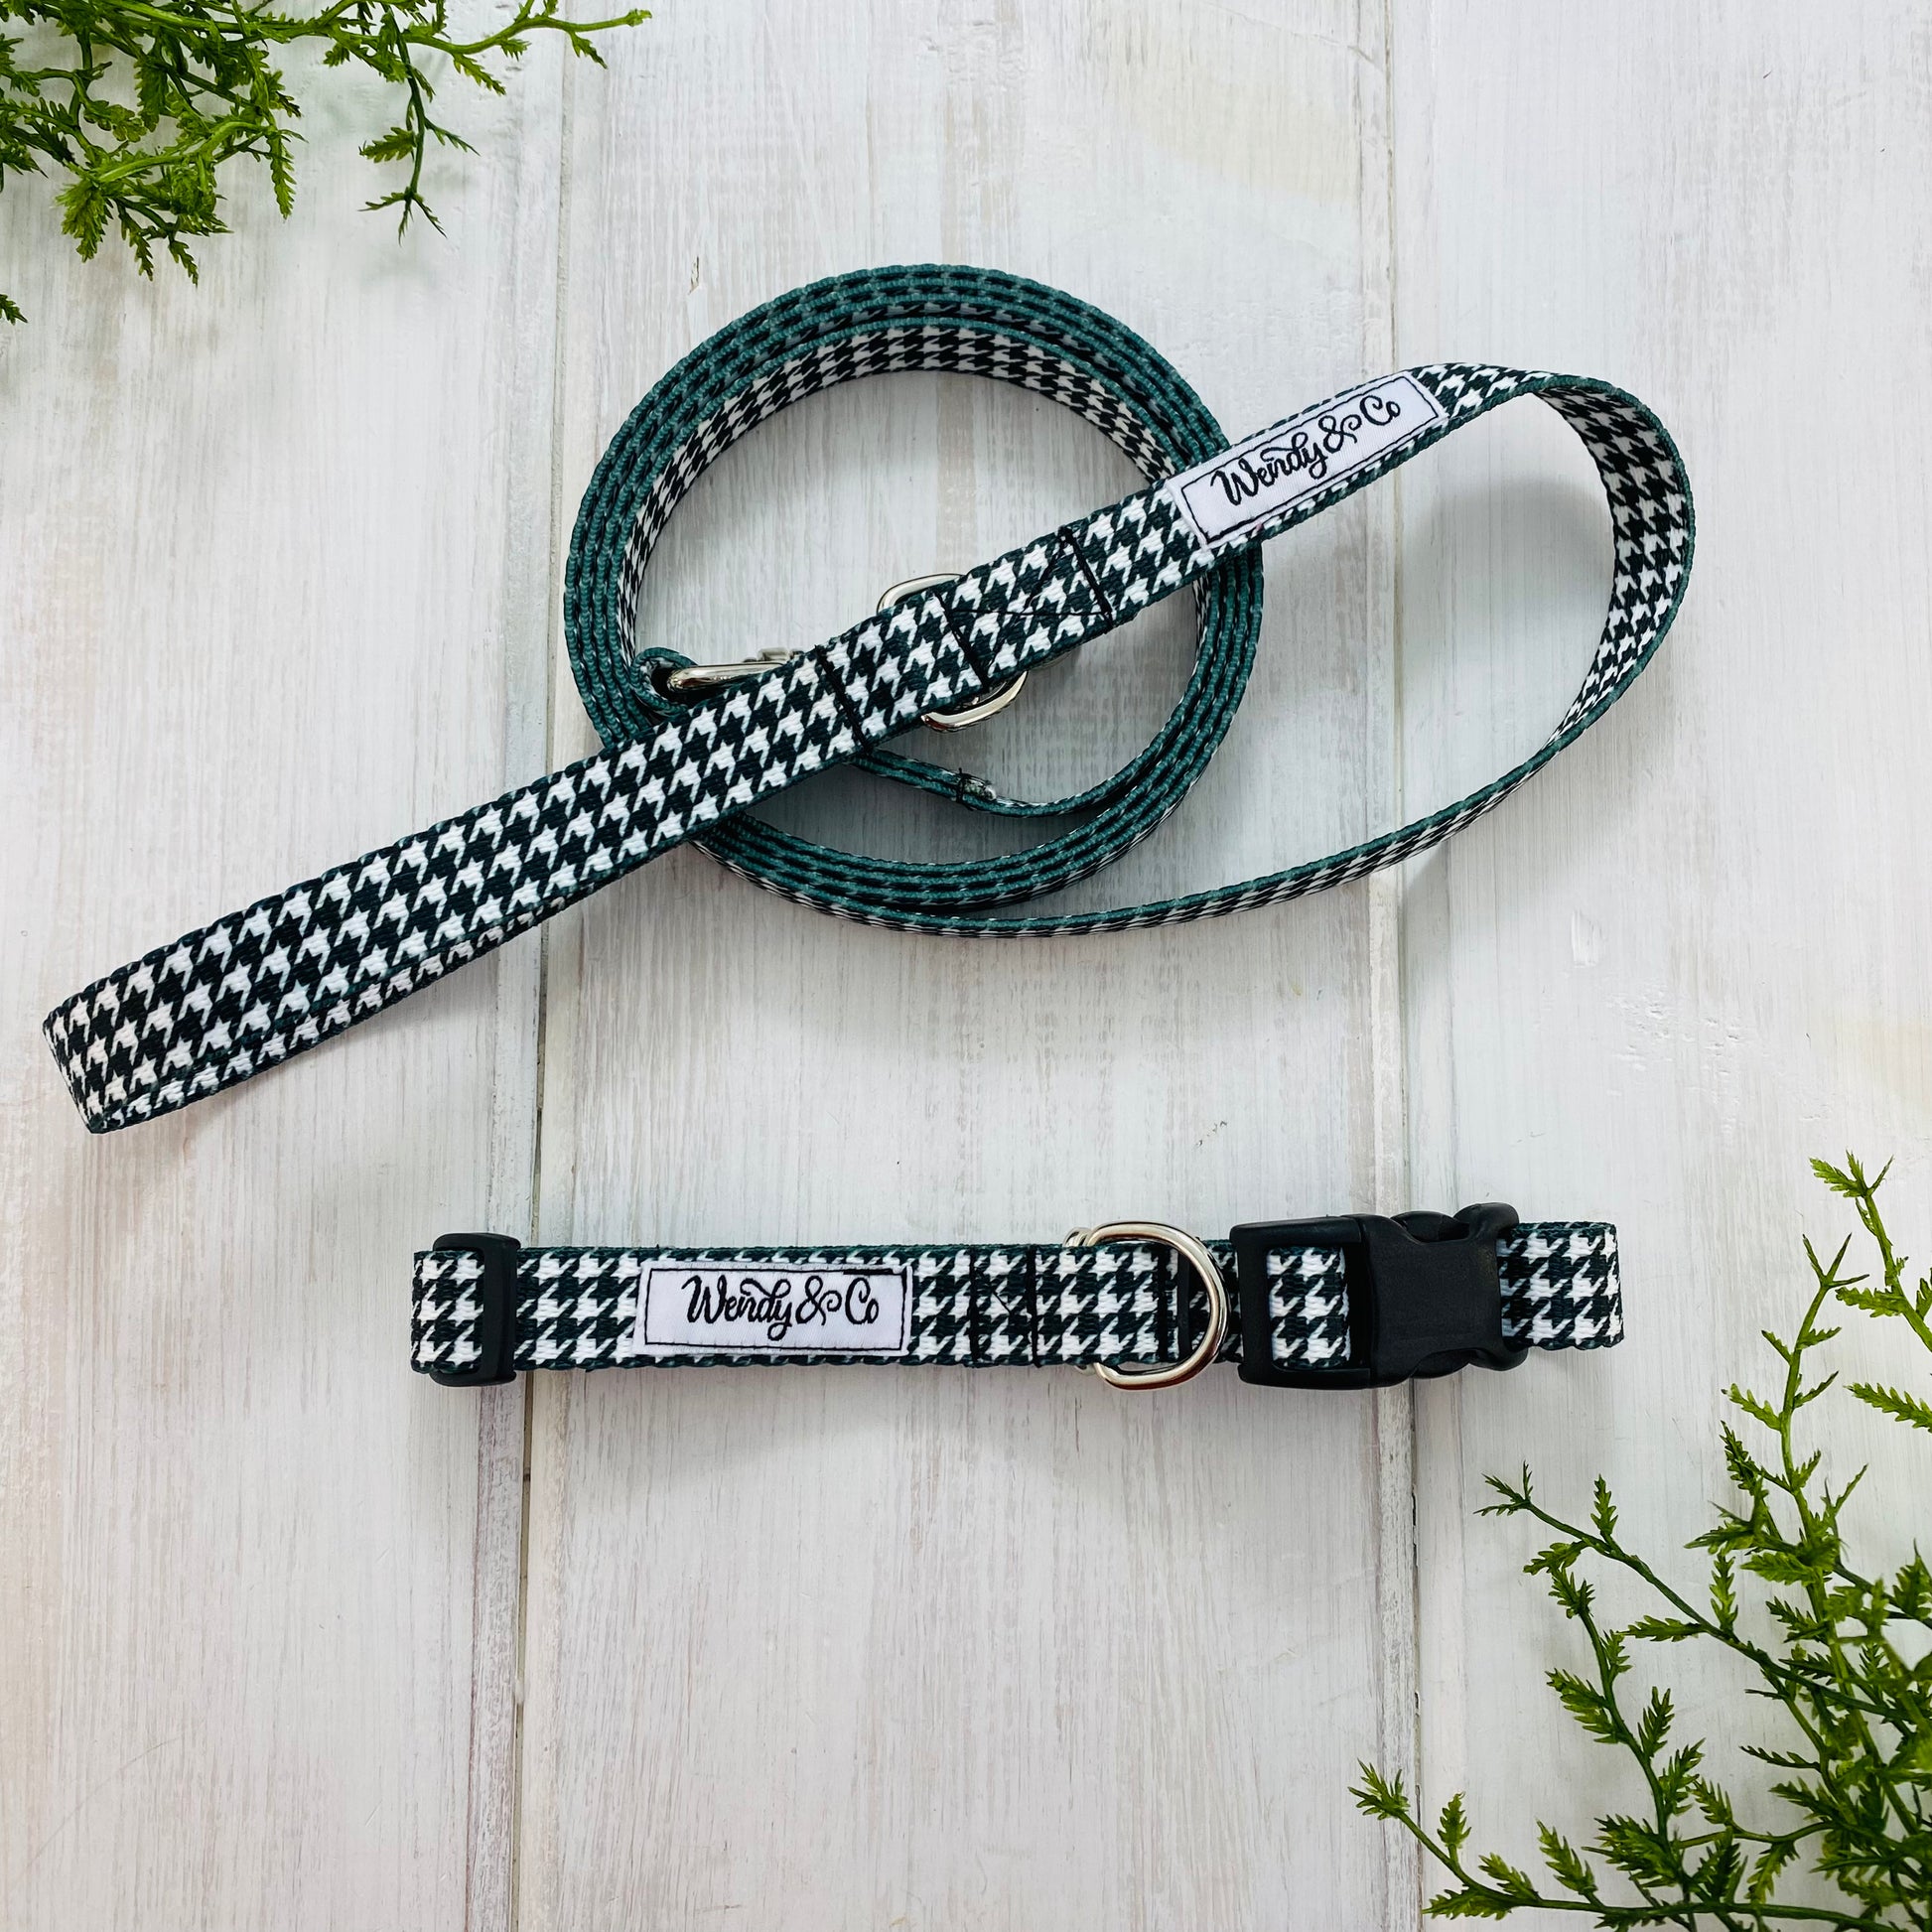 Black and white hounds tooth collar and leash great for doodles and all breeds.